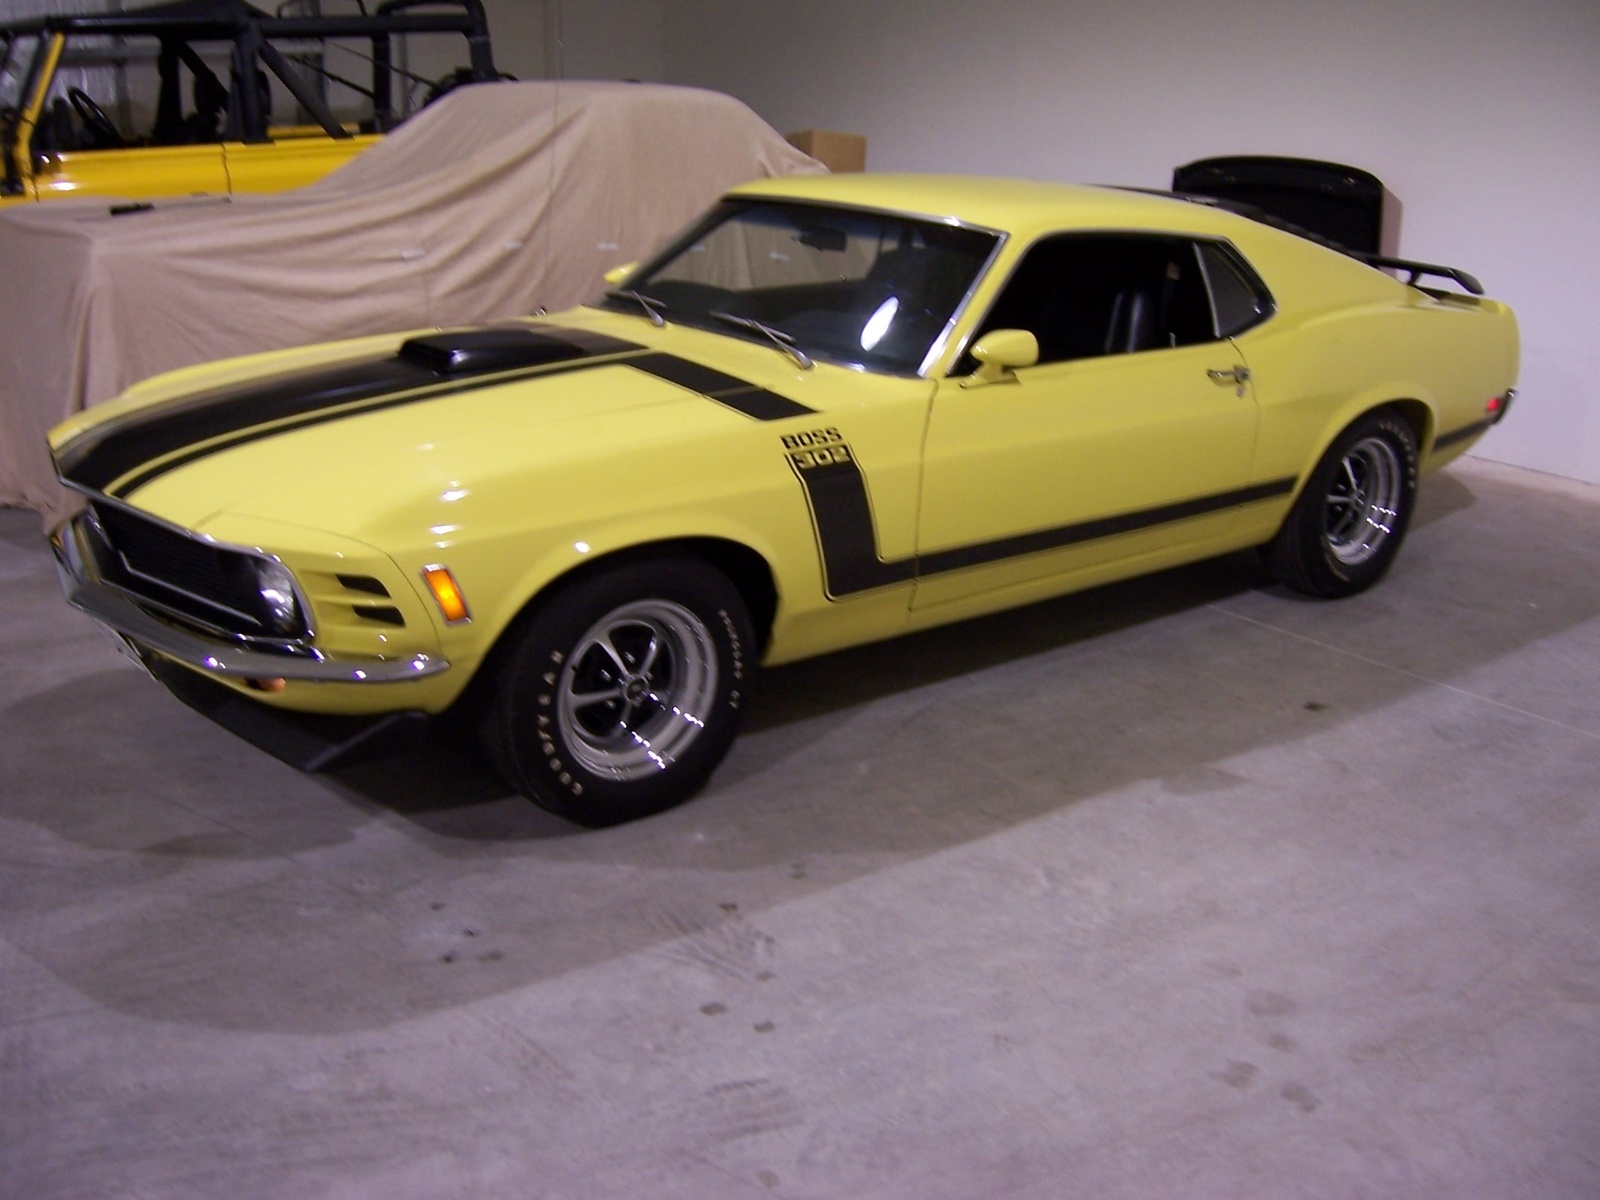 We Love Ford's, Past, Present And Future.: 1970 Ford Mustangs